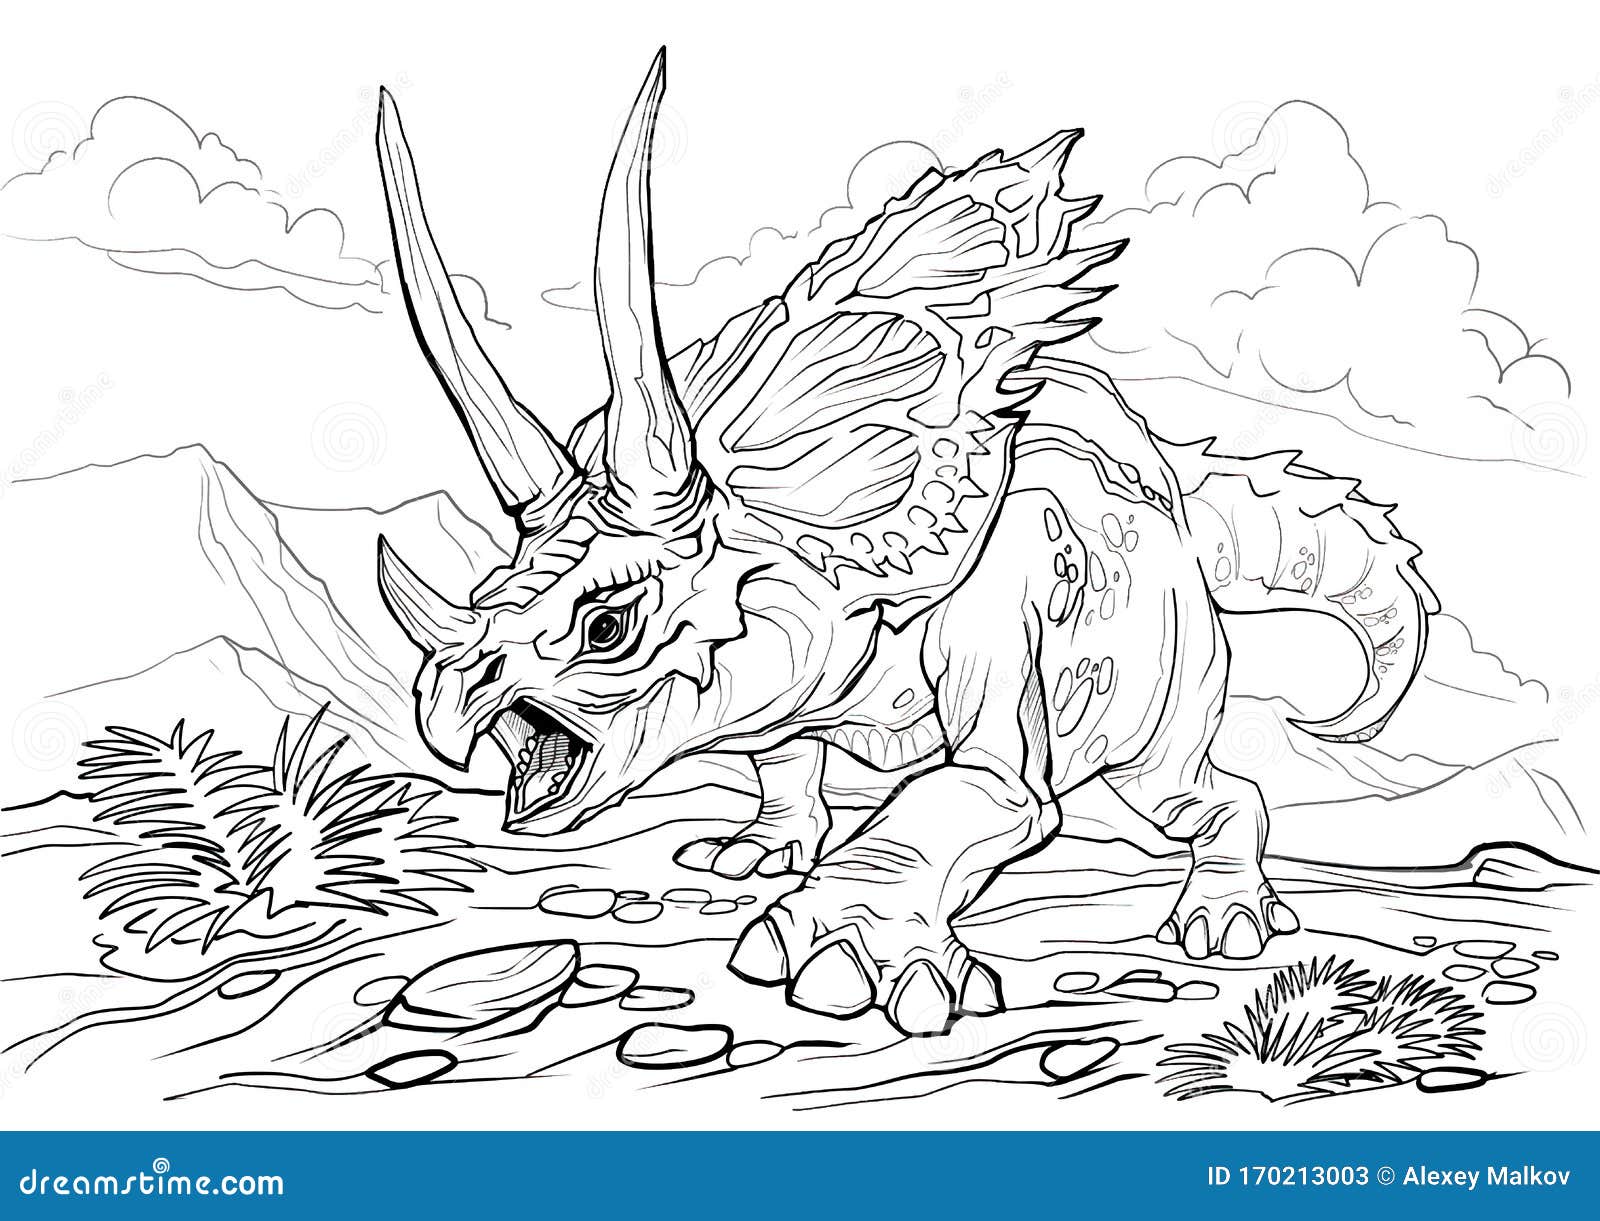 Triceratops. Dinosaur Coloring Page for Children and Adults, Hand Drawn